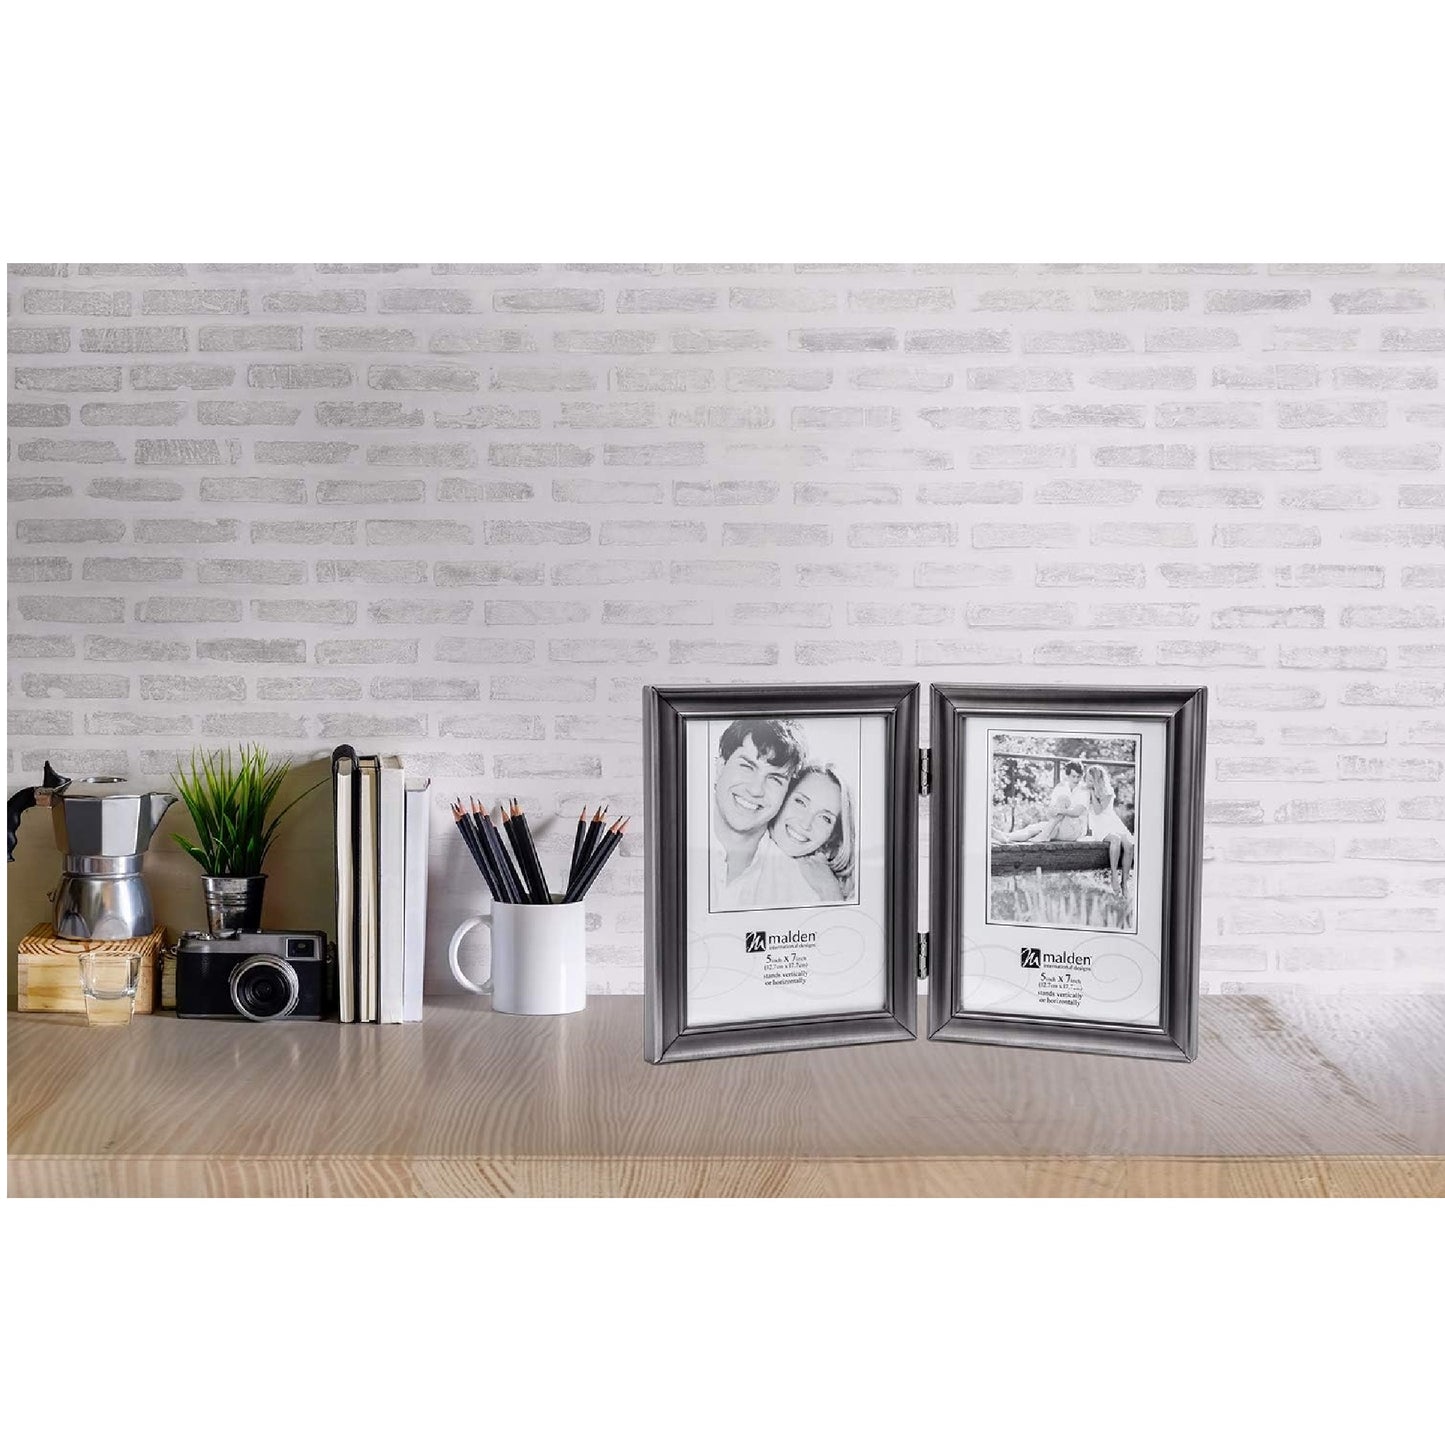 Malden Concourse Pewter Hinged Picture Frame Double Vertical - Ria's Hallmark & Jewelry Boutique